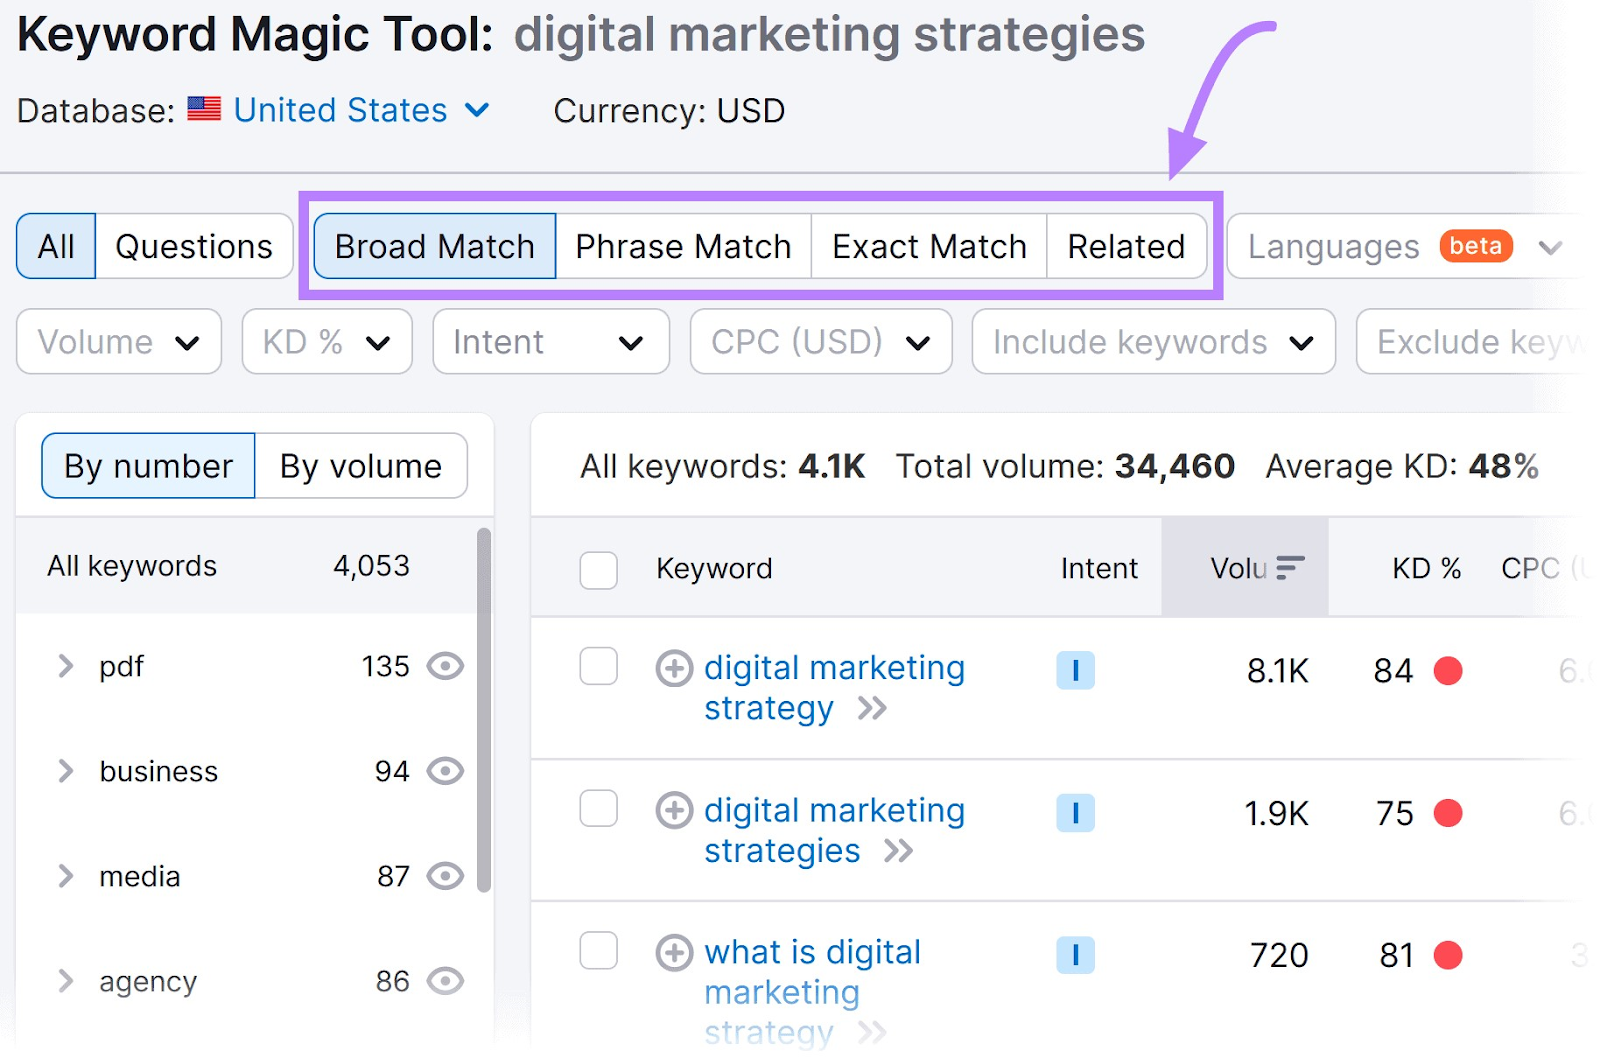 Keyword Magic Tool match type filters highlighted